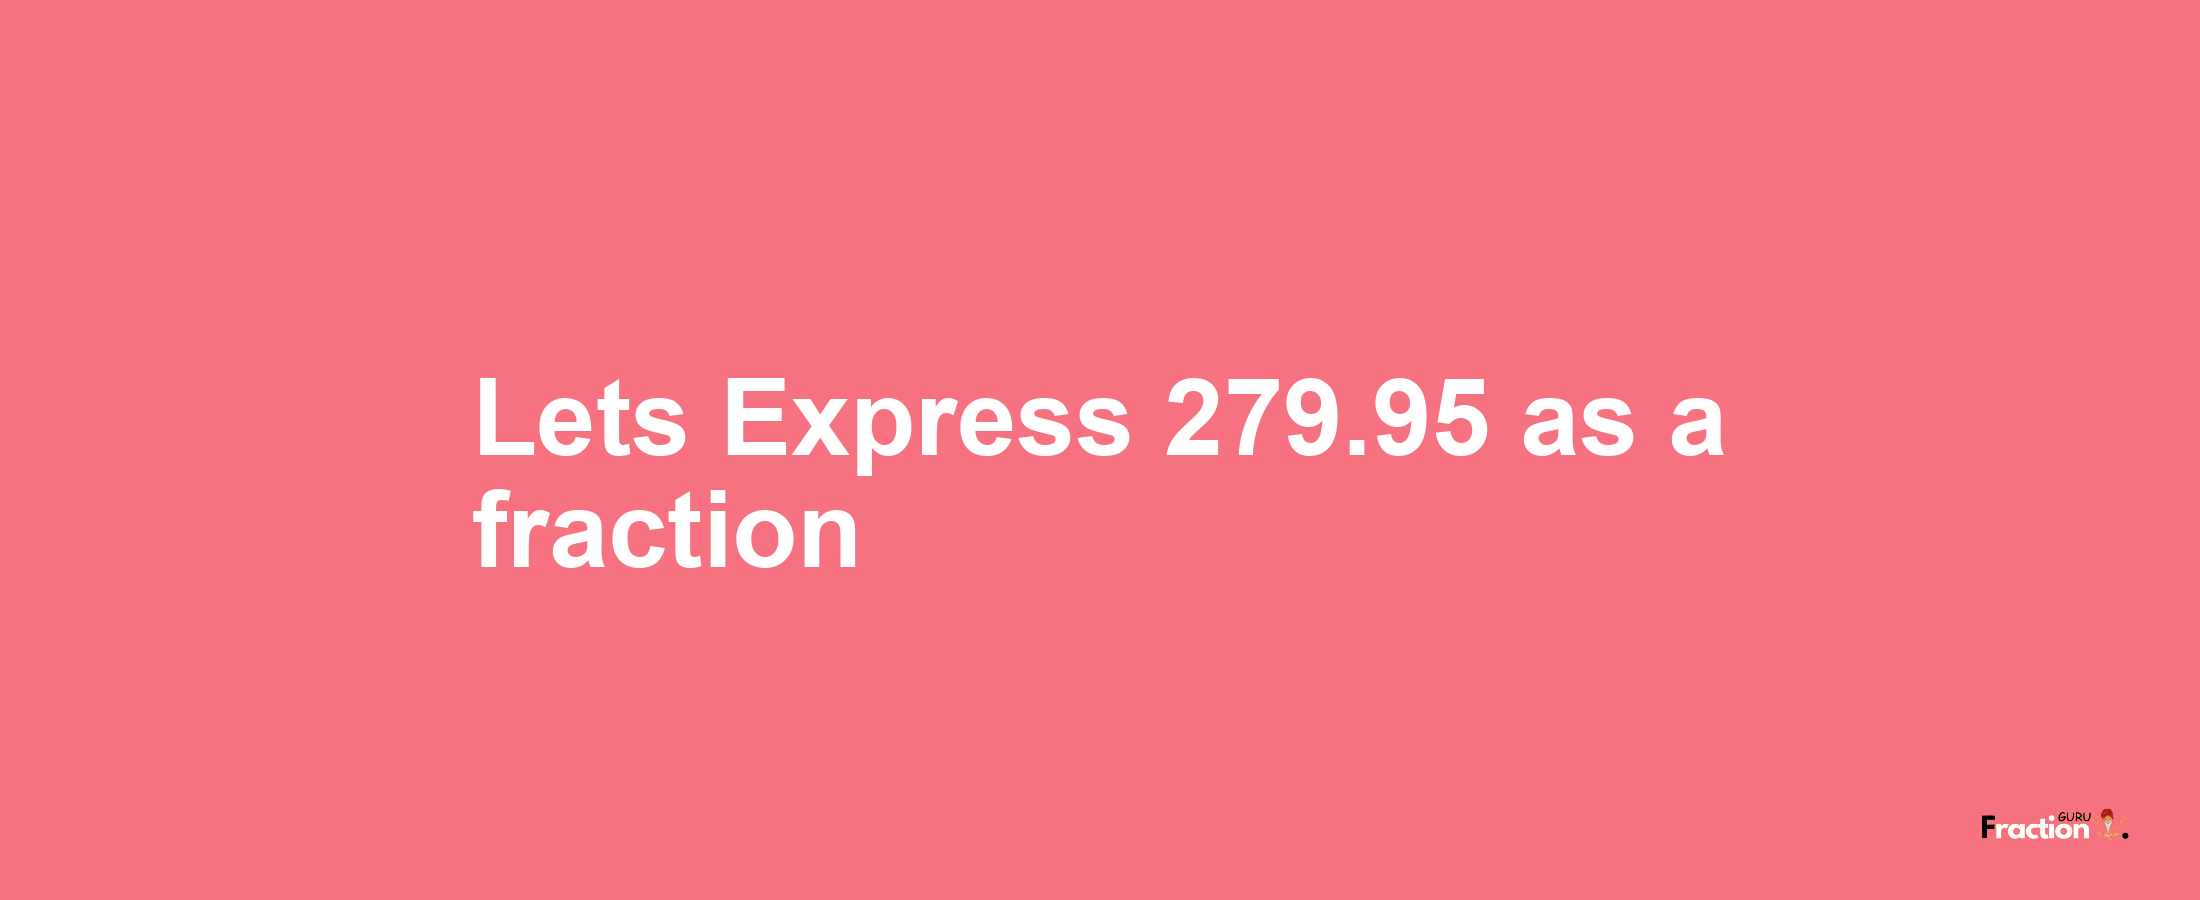 Lets Express 279.95 as afraction